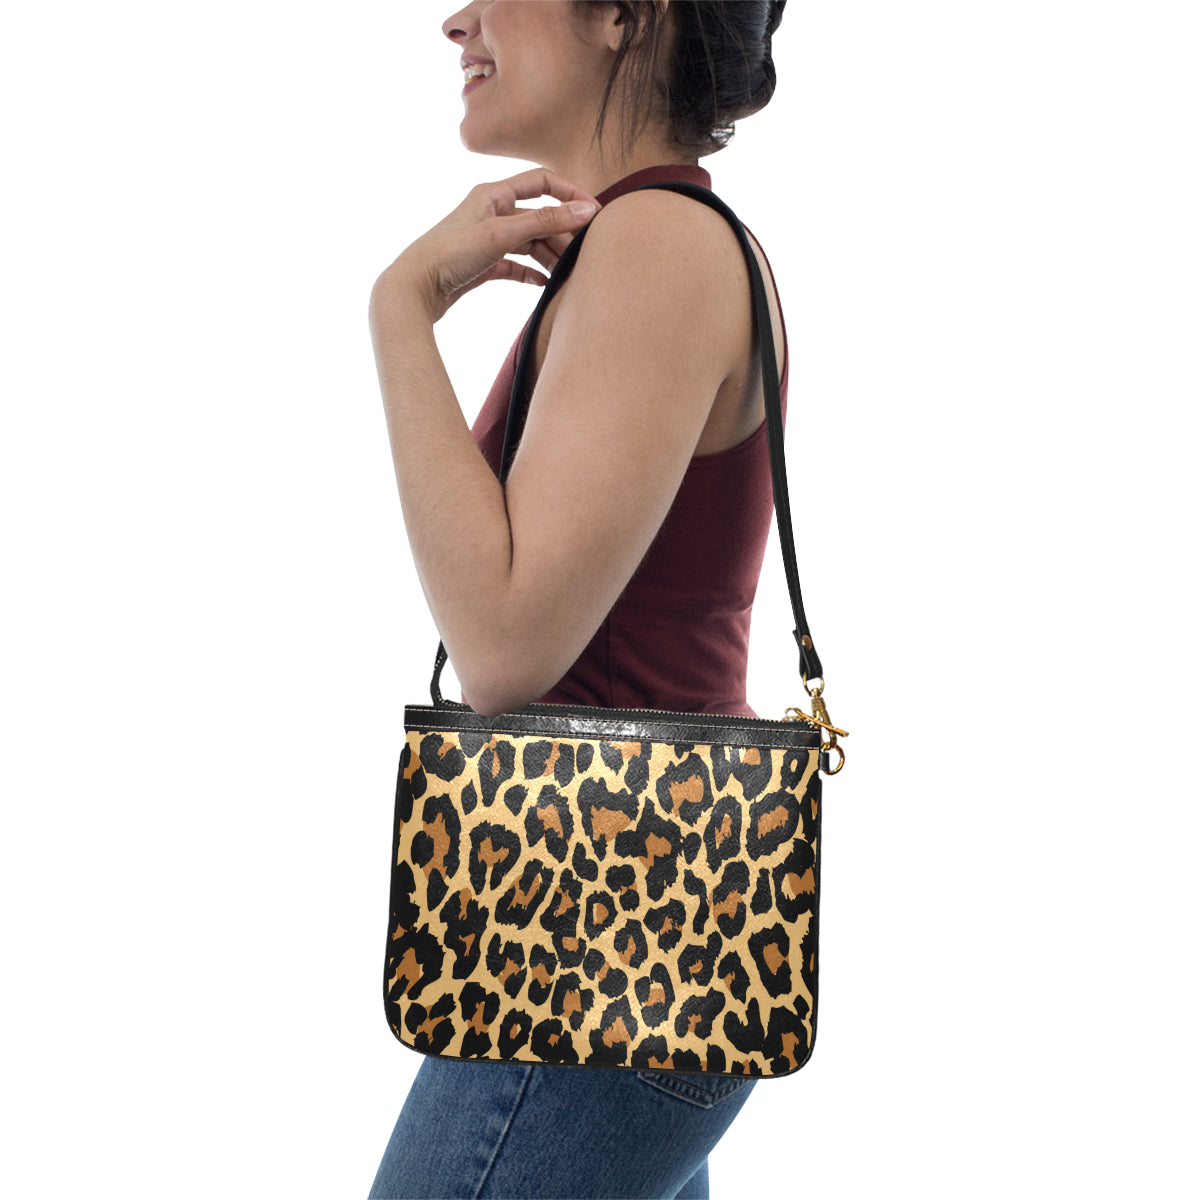 Leopard Print Crossbody Bag/hair on Hide Bag/ Leather Shoulder Bag/ Animal  Print Crossbody Bag/leopard Print Purse Gifts for Her - Etsy